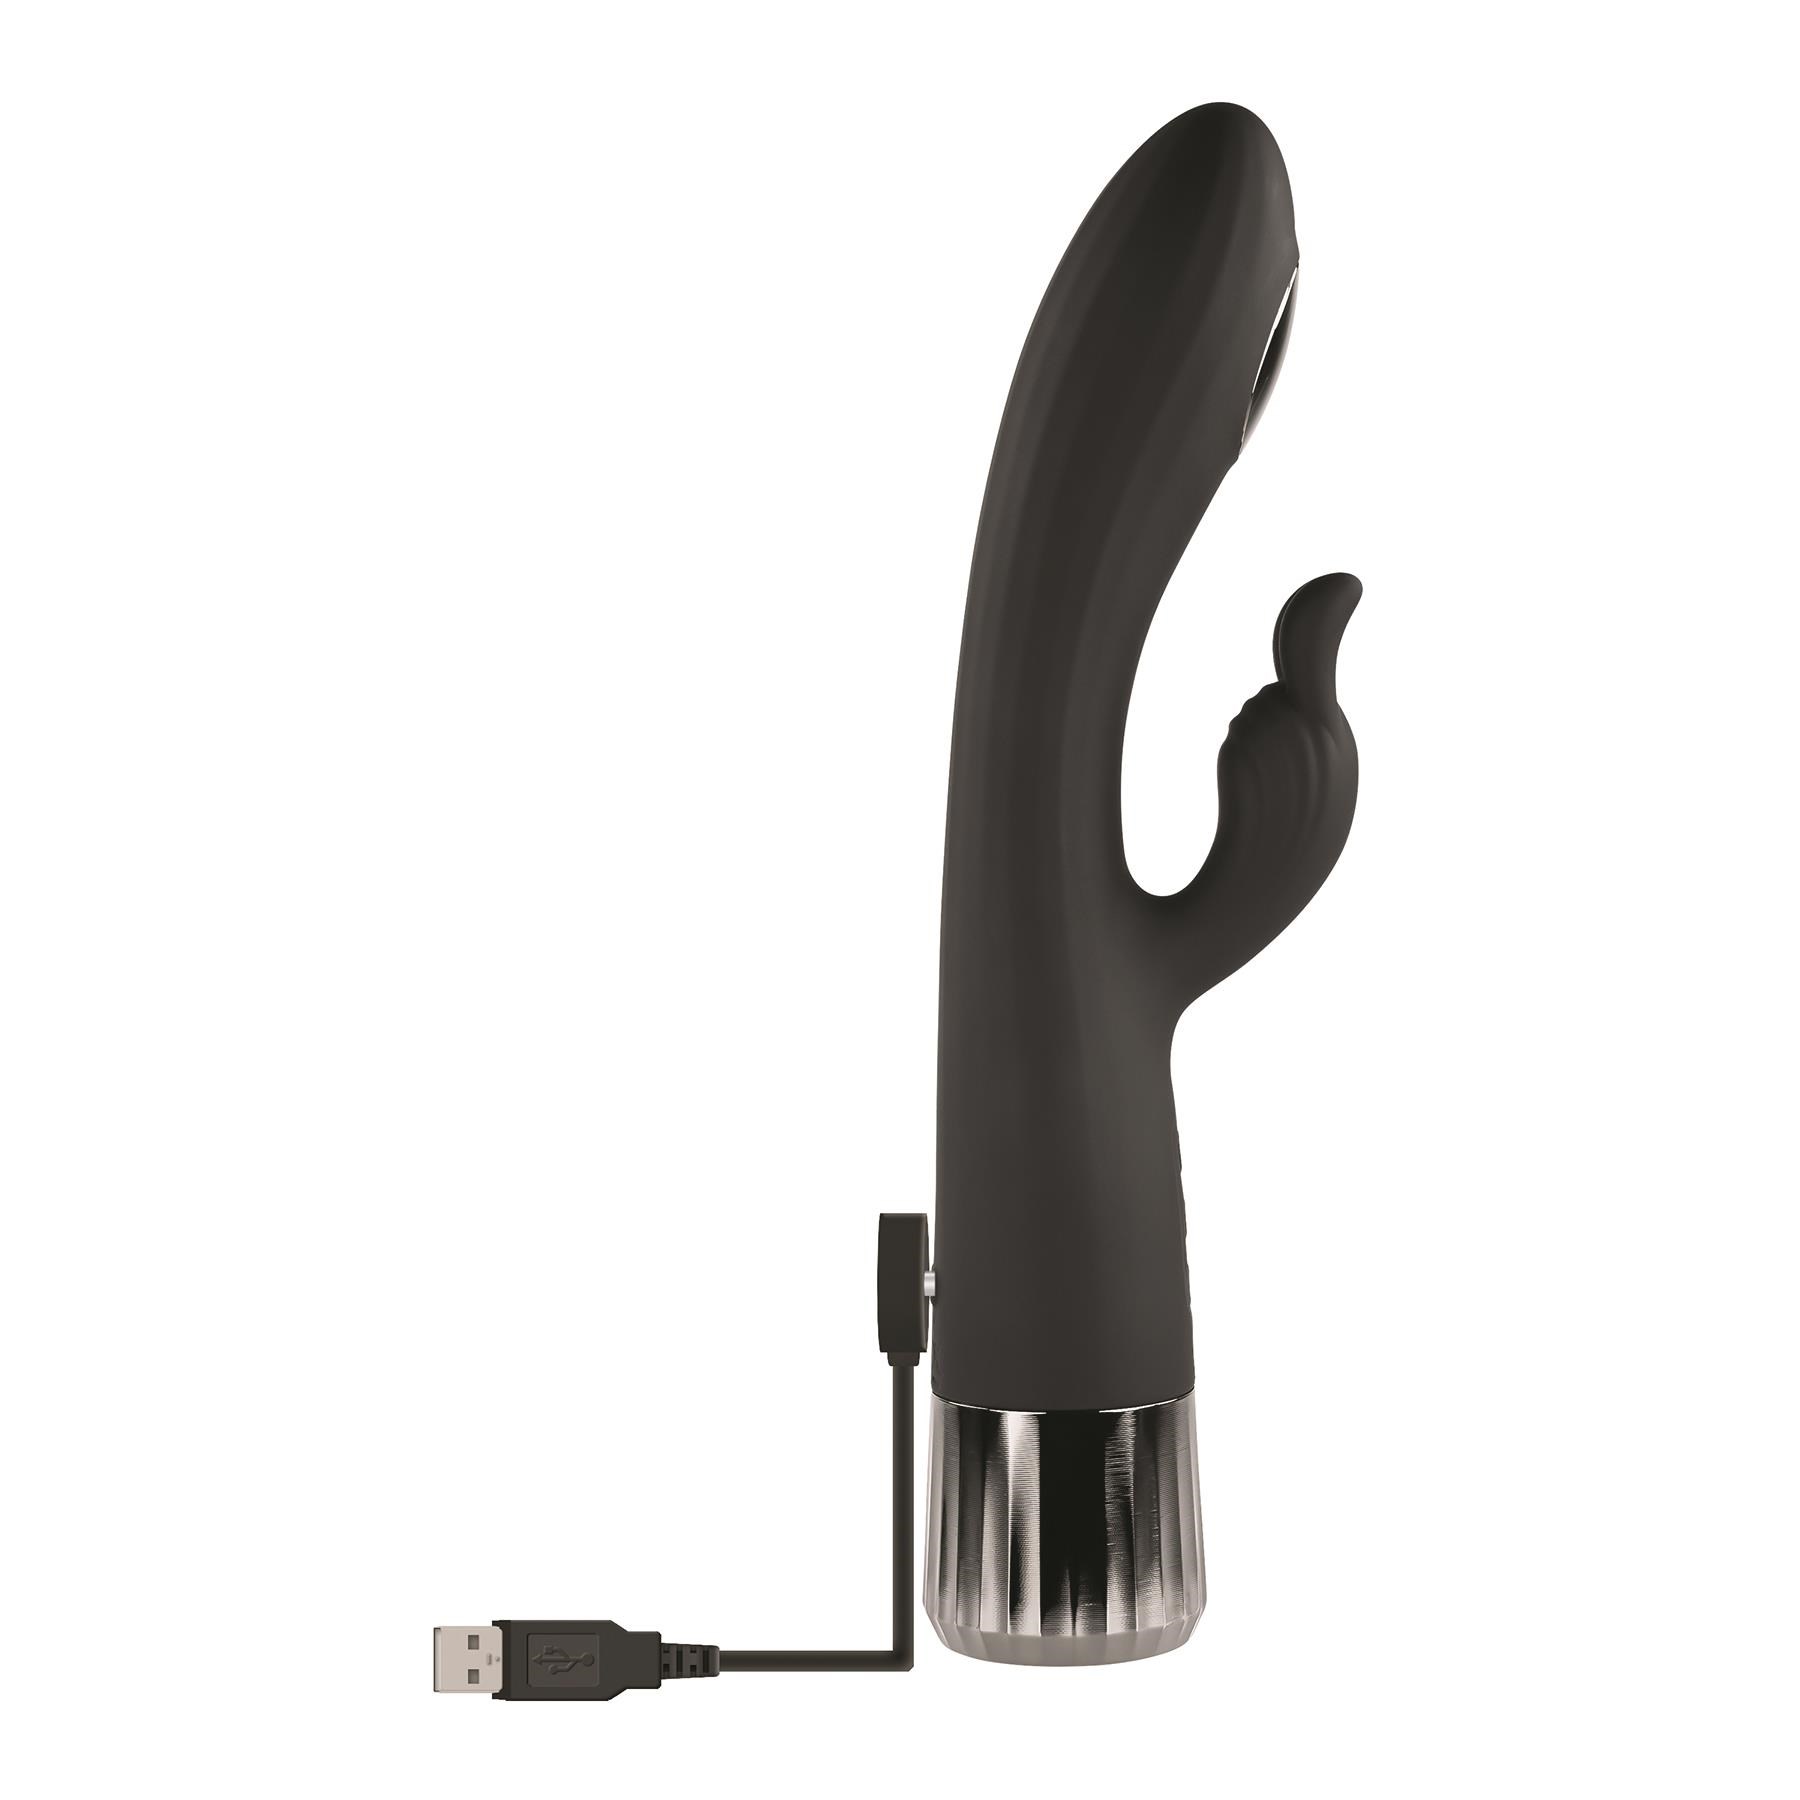 Heat Up And Chill Rabbit Vibrator - Showing Where Charging Cable is Placed